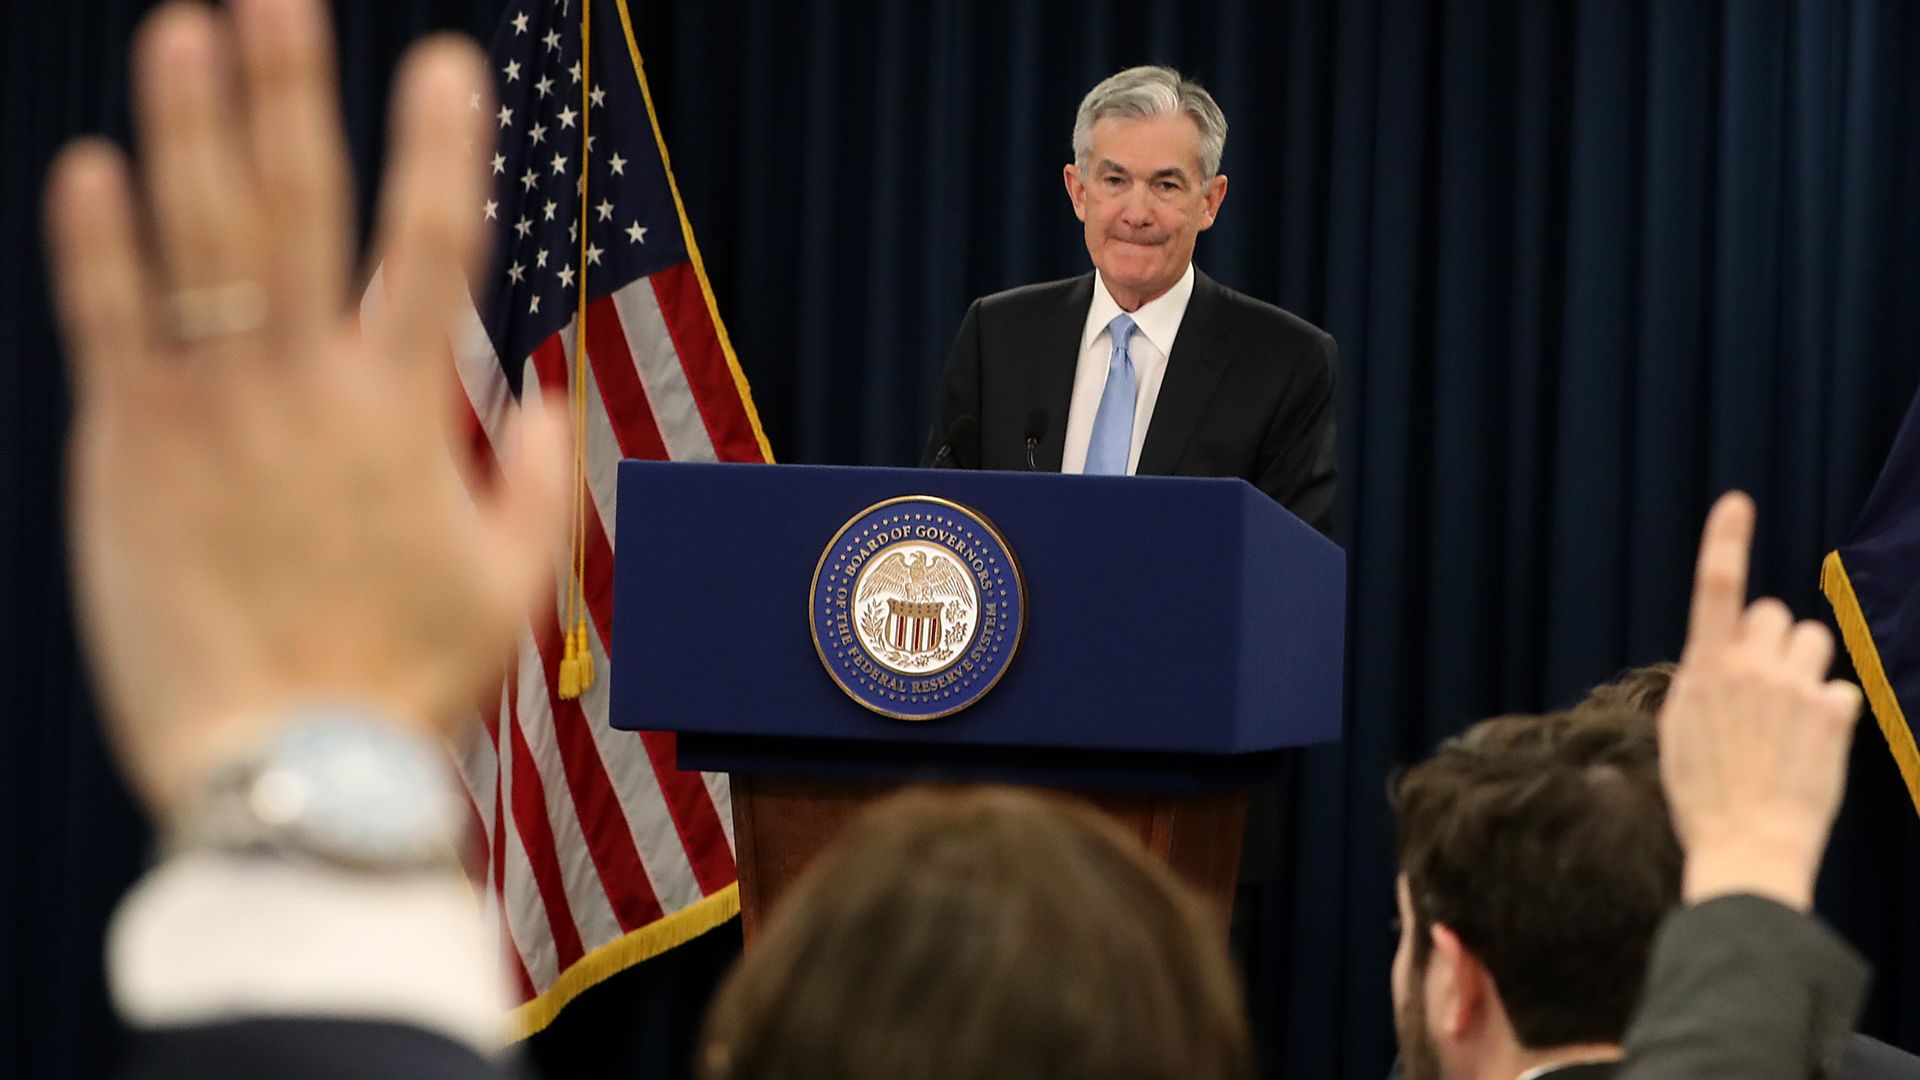 WASHINGTON, DC - MARCH 20: Federal Reserve Board Chairman Jerome Powell speaks during a news conference on March 20, 2019 in Washington, DC. 